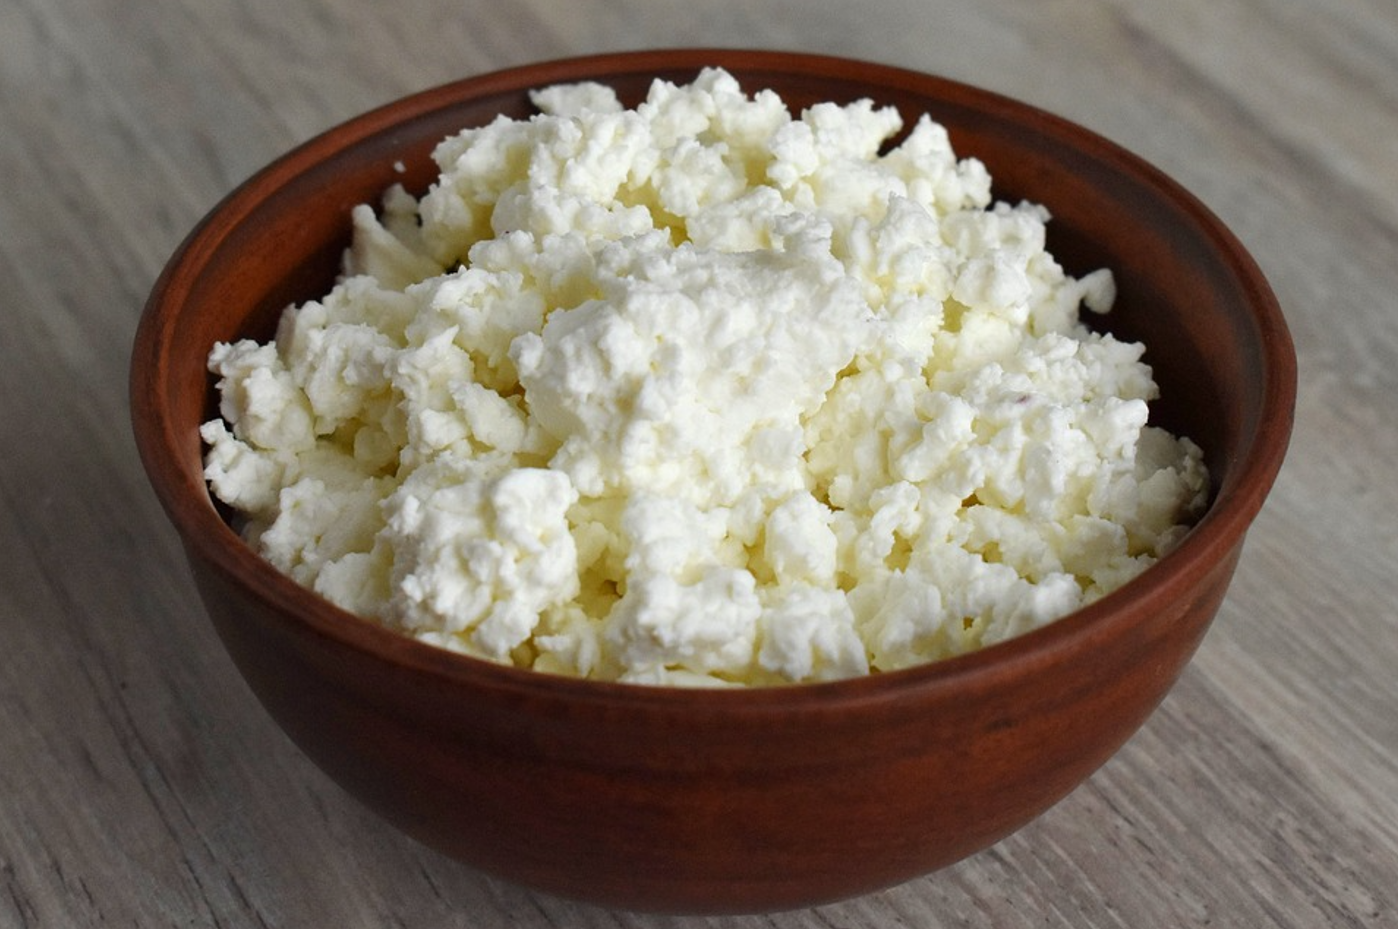 How to check cottage cheese for quality